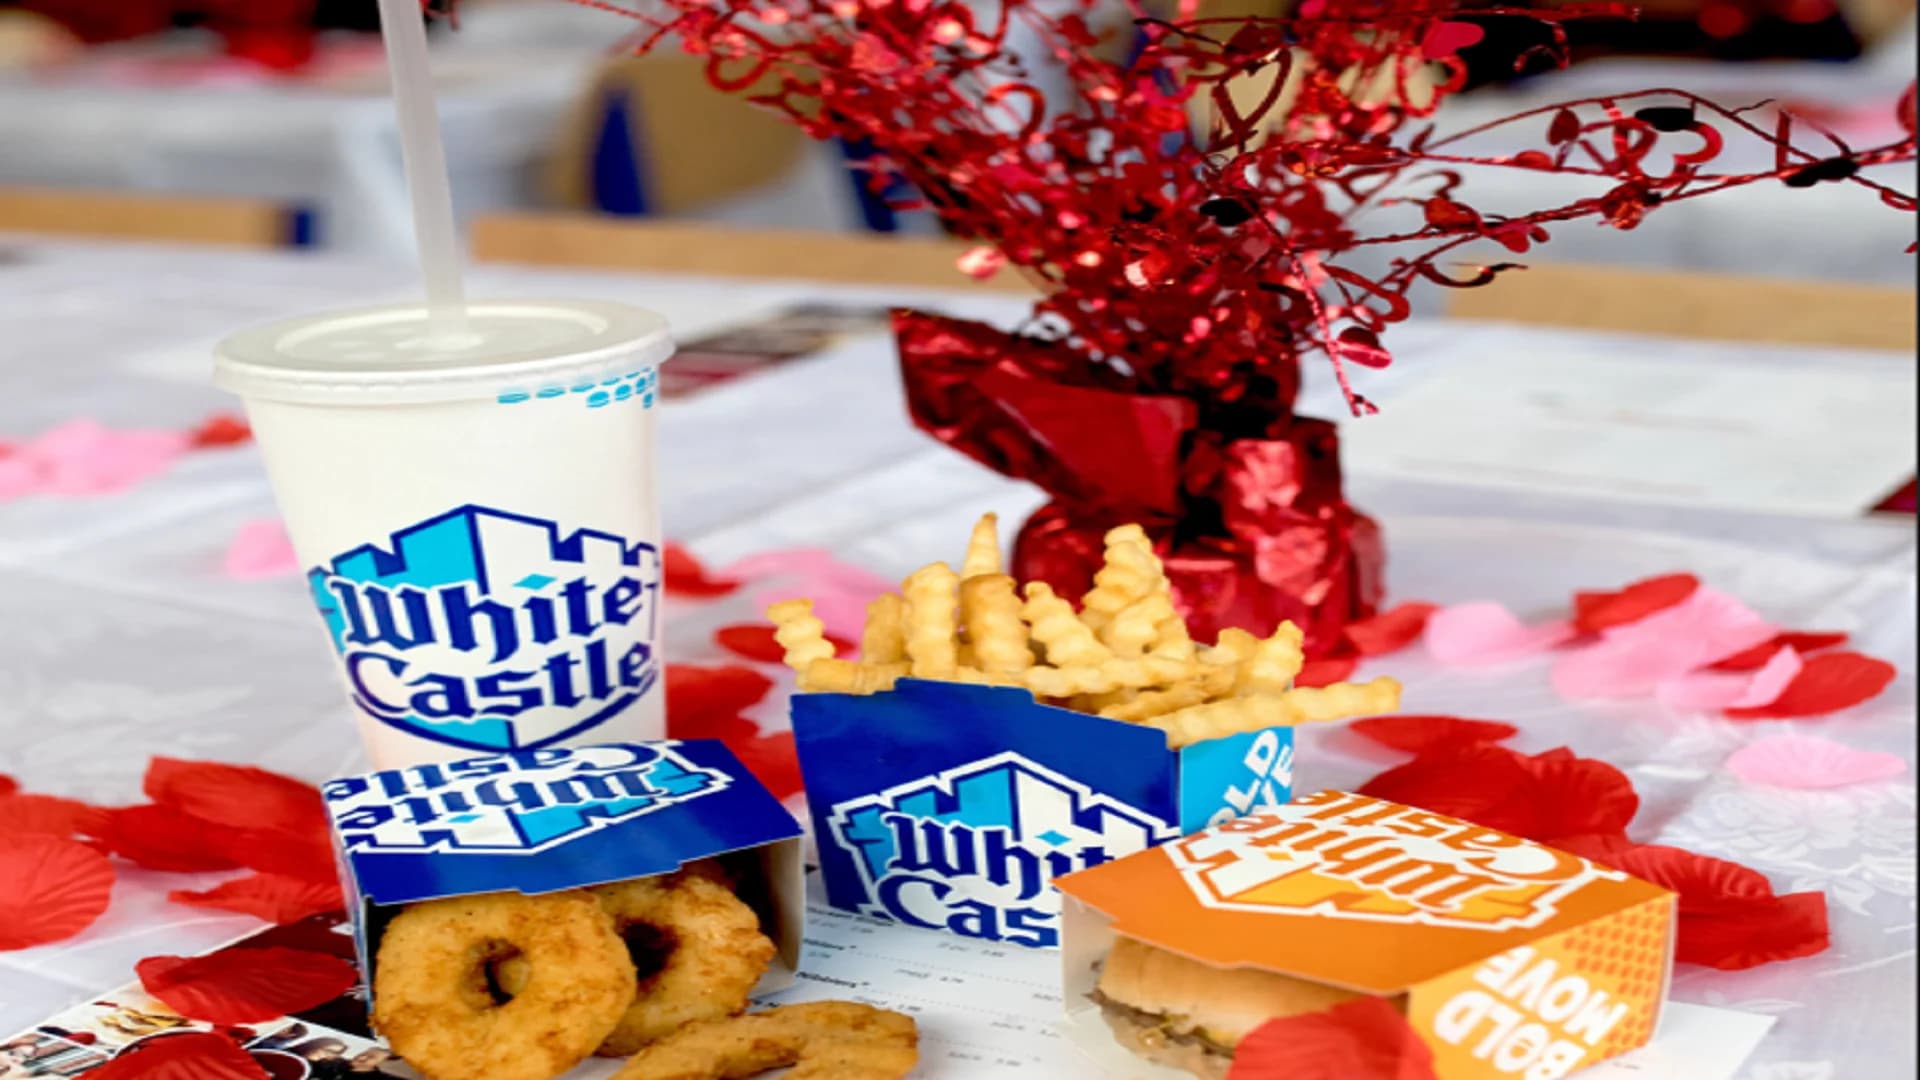 Calling all Love Castle fans! White Castle brings Valentine's Day dinner experience back after 2-year hiatus 